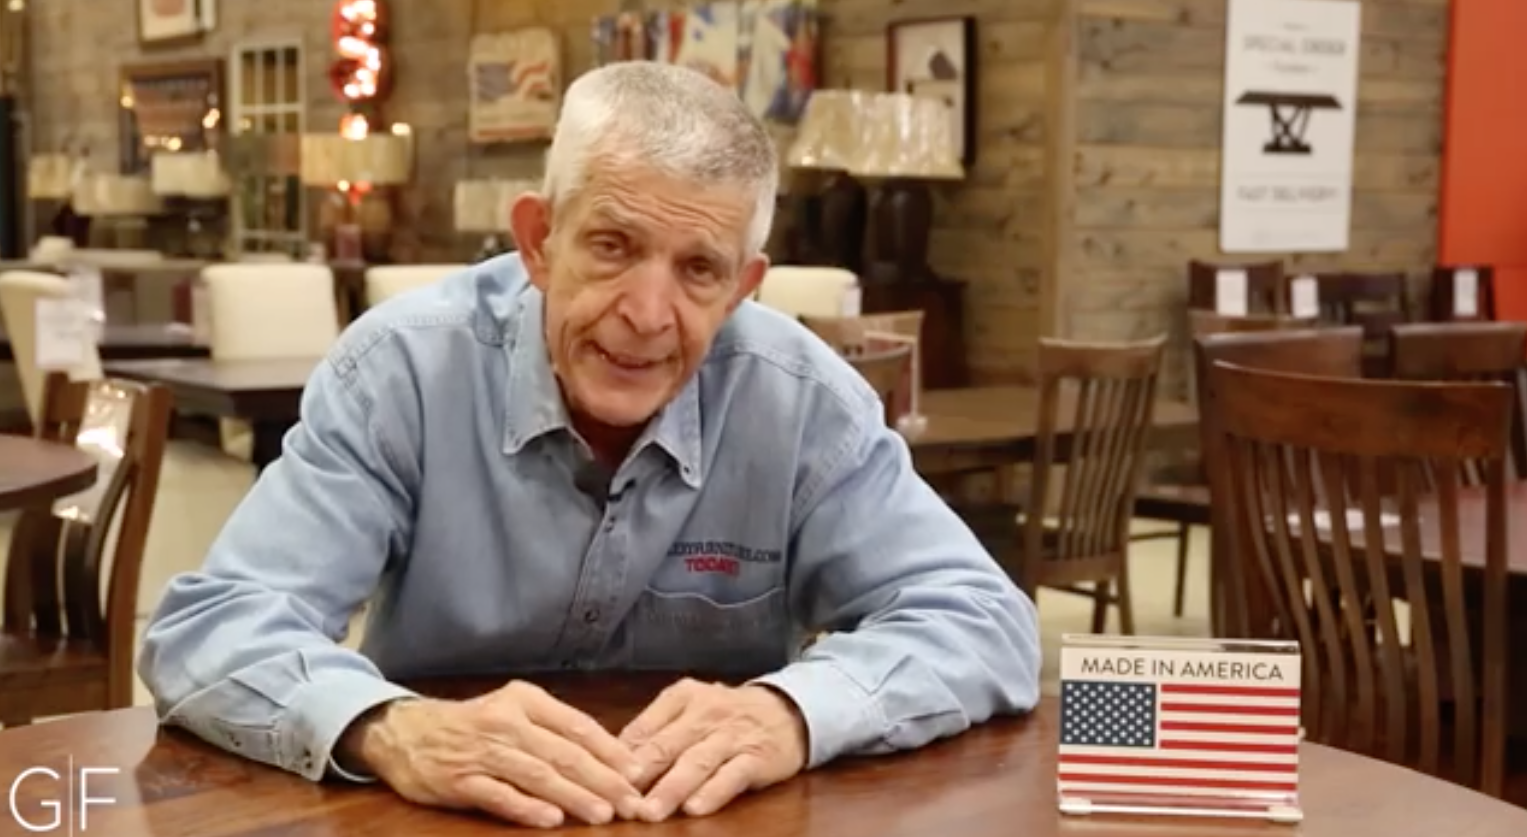 Houston's Mattress Mack Giving Houseful of Furniture to 30